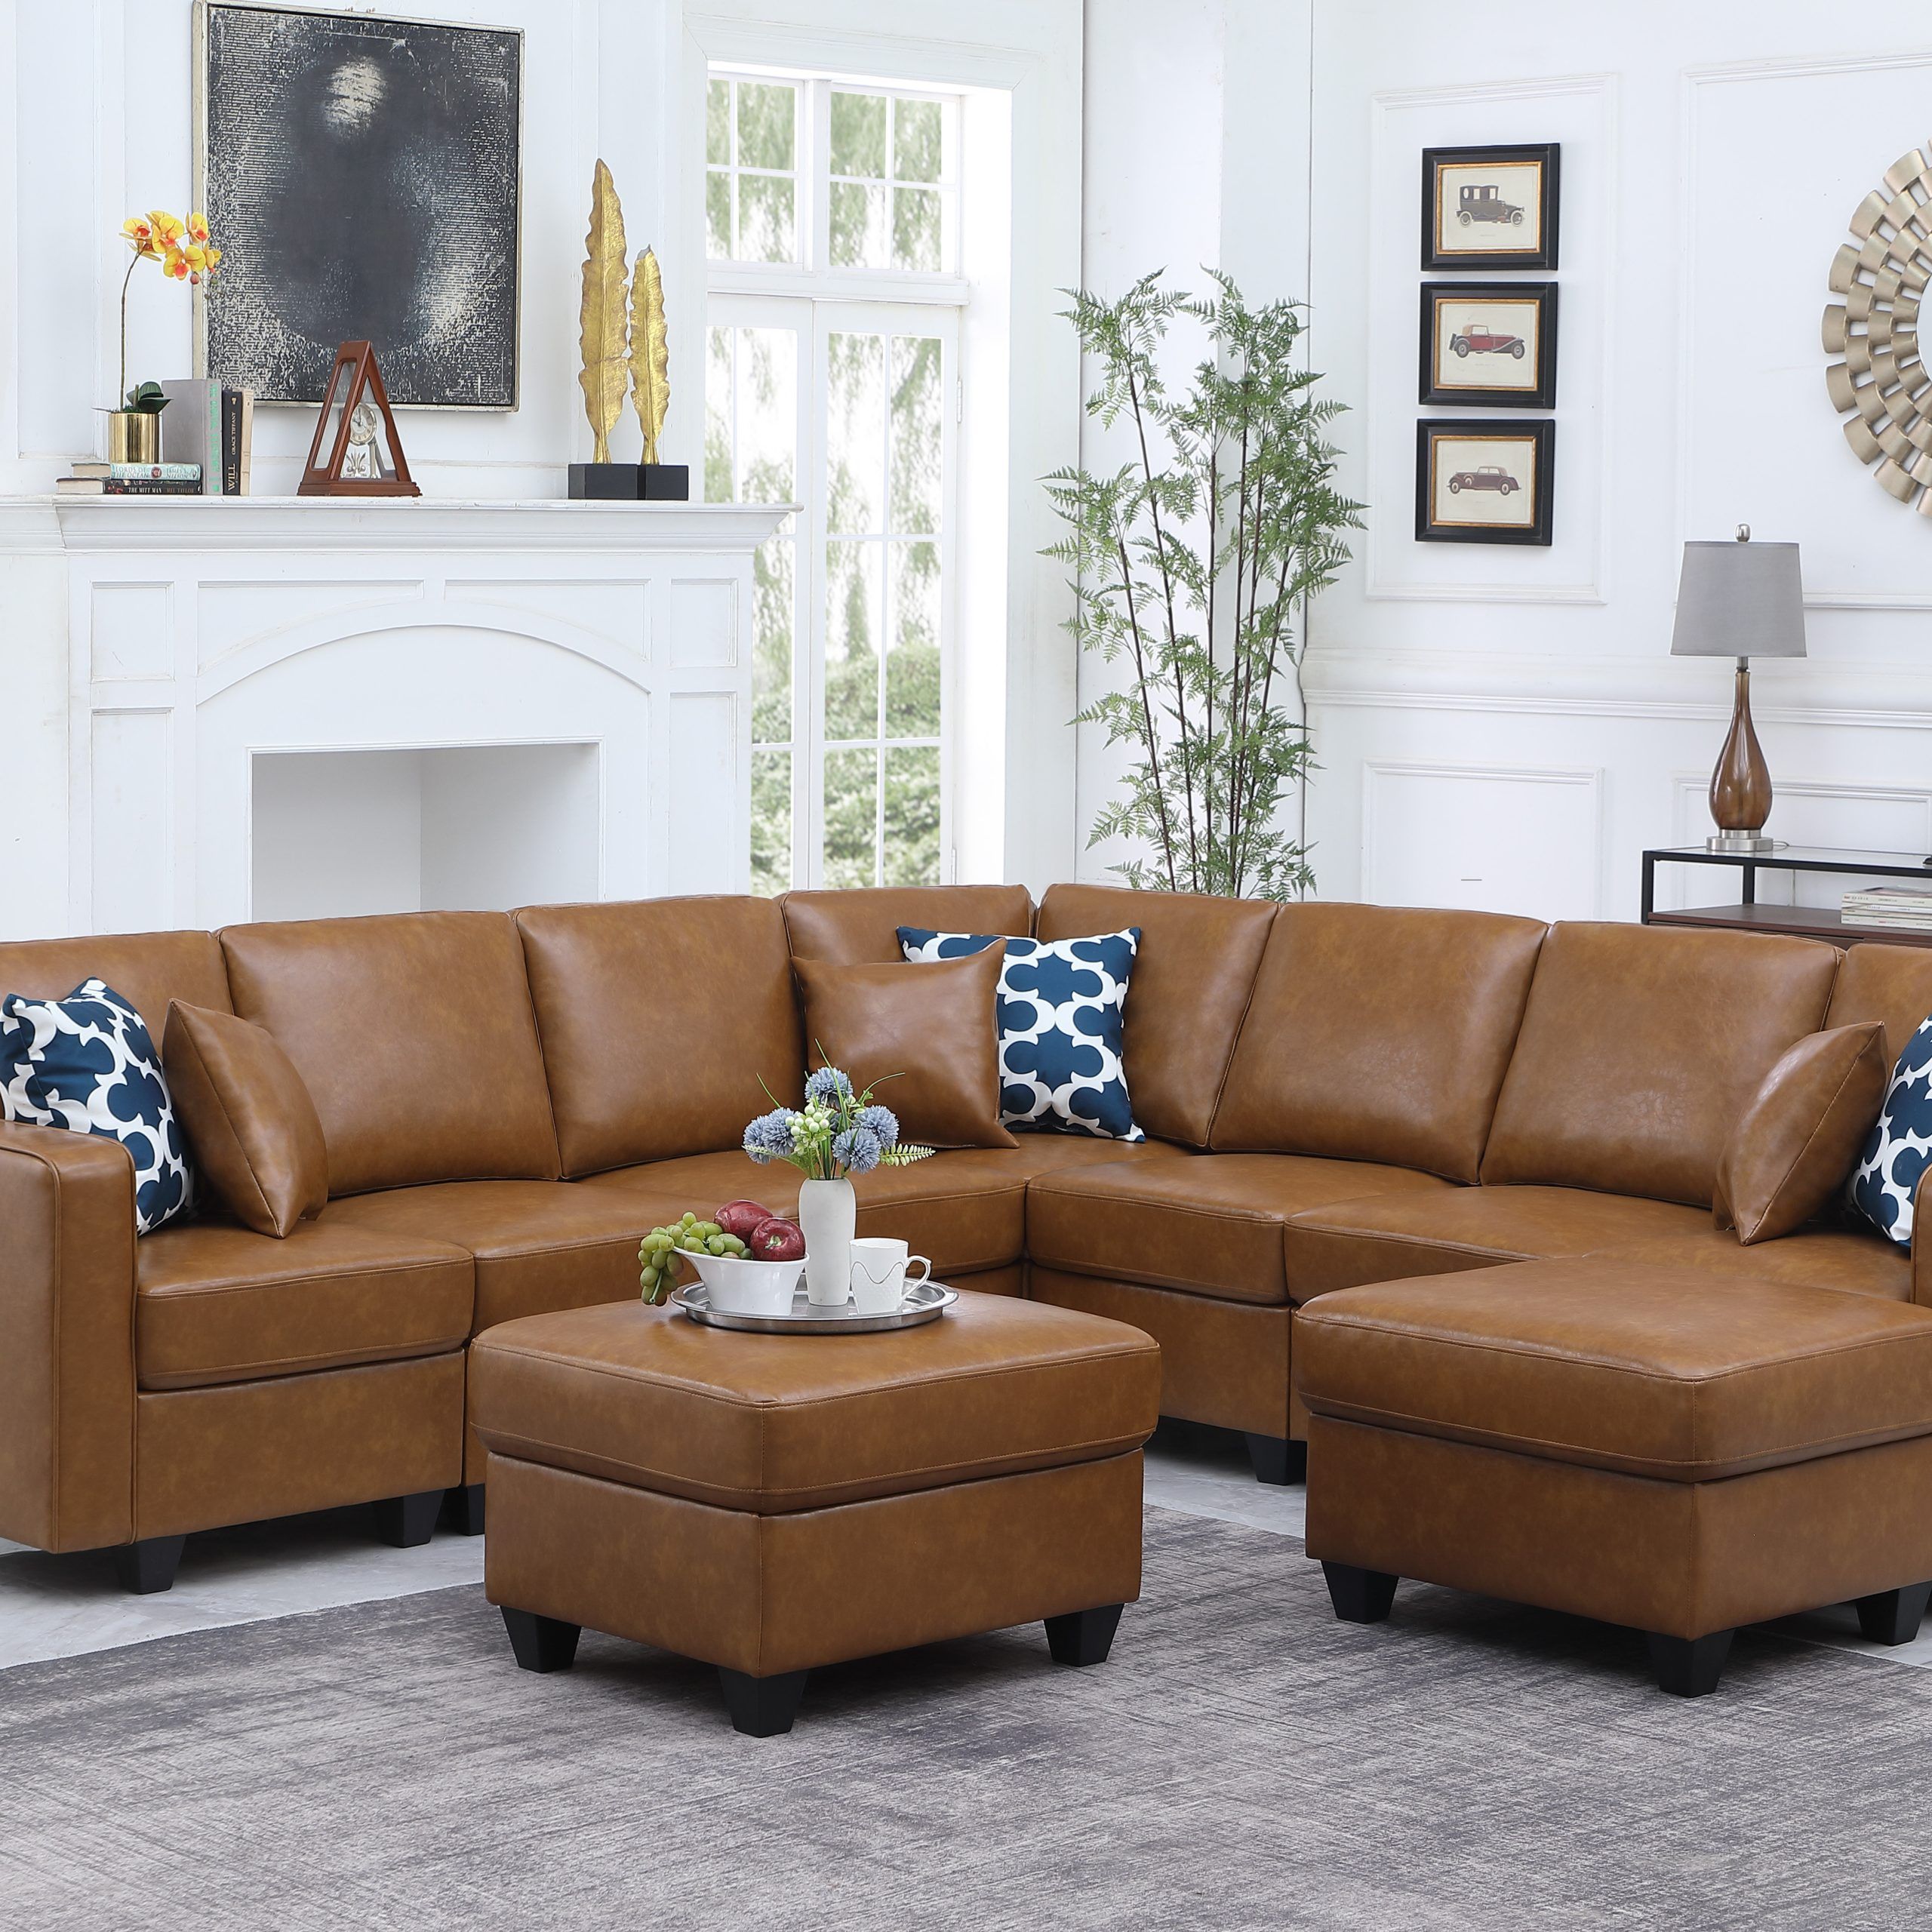 Devion Furniture 9 – Piece Vegan Leather Sectional & Reviews | Wayfair With Regard To Faux Leather Sectional Sofa Sets (View 5 of 15)